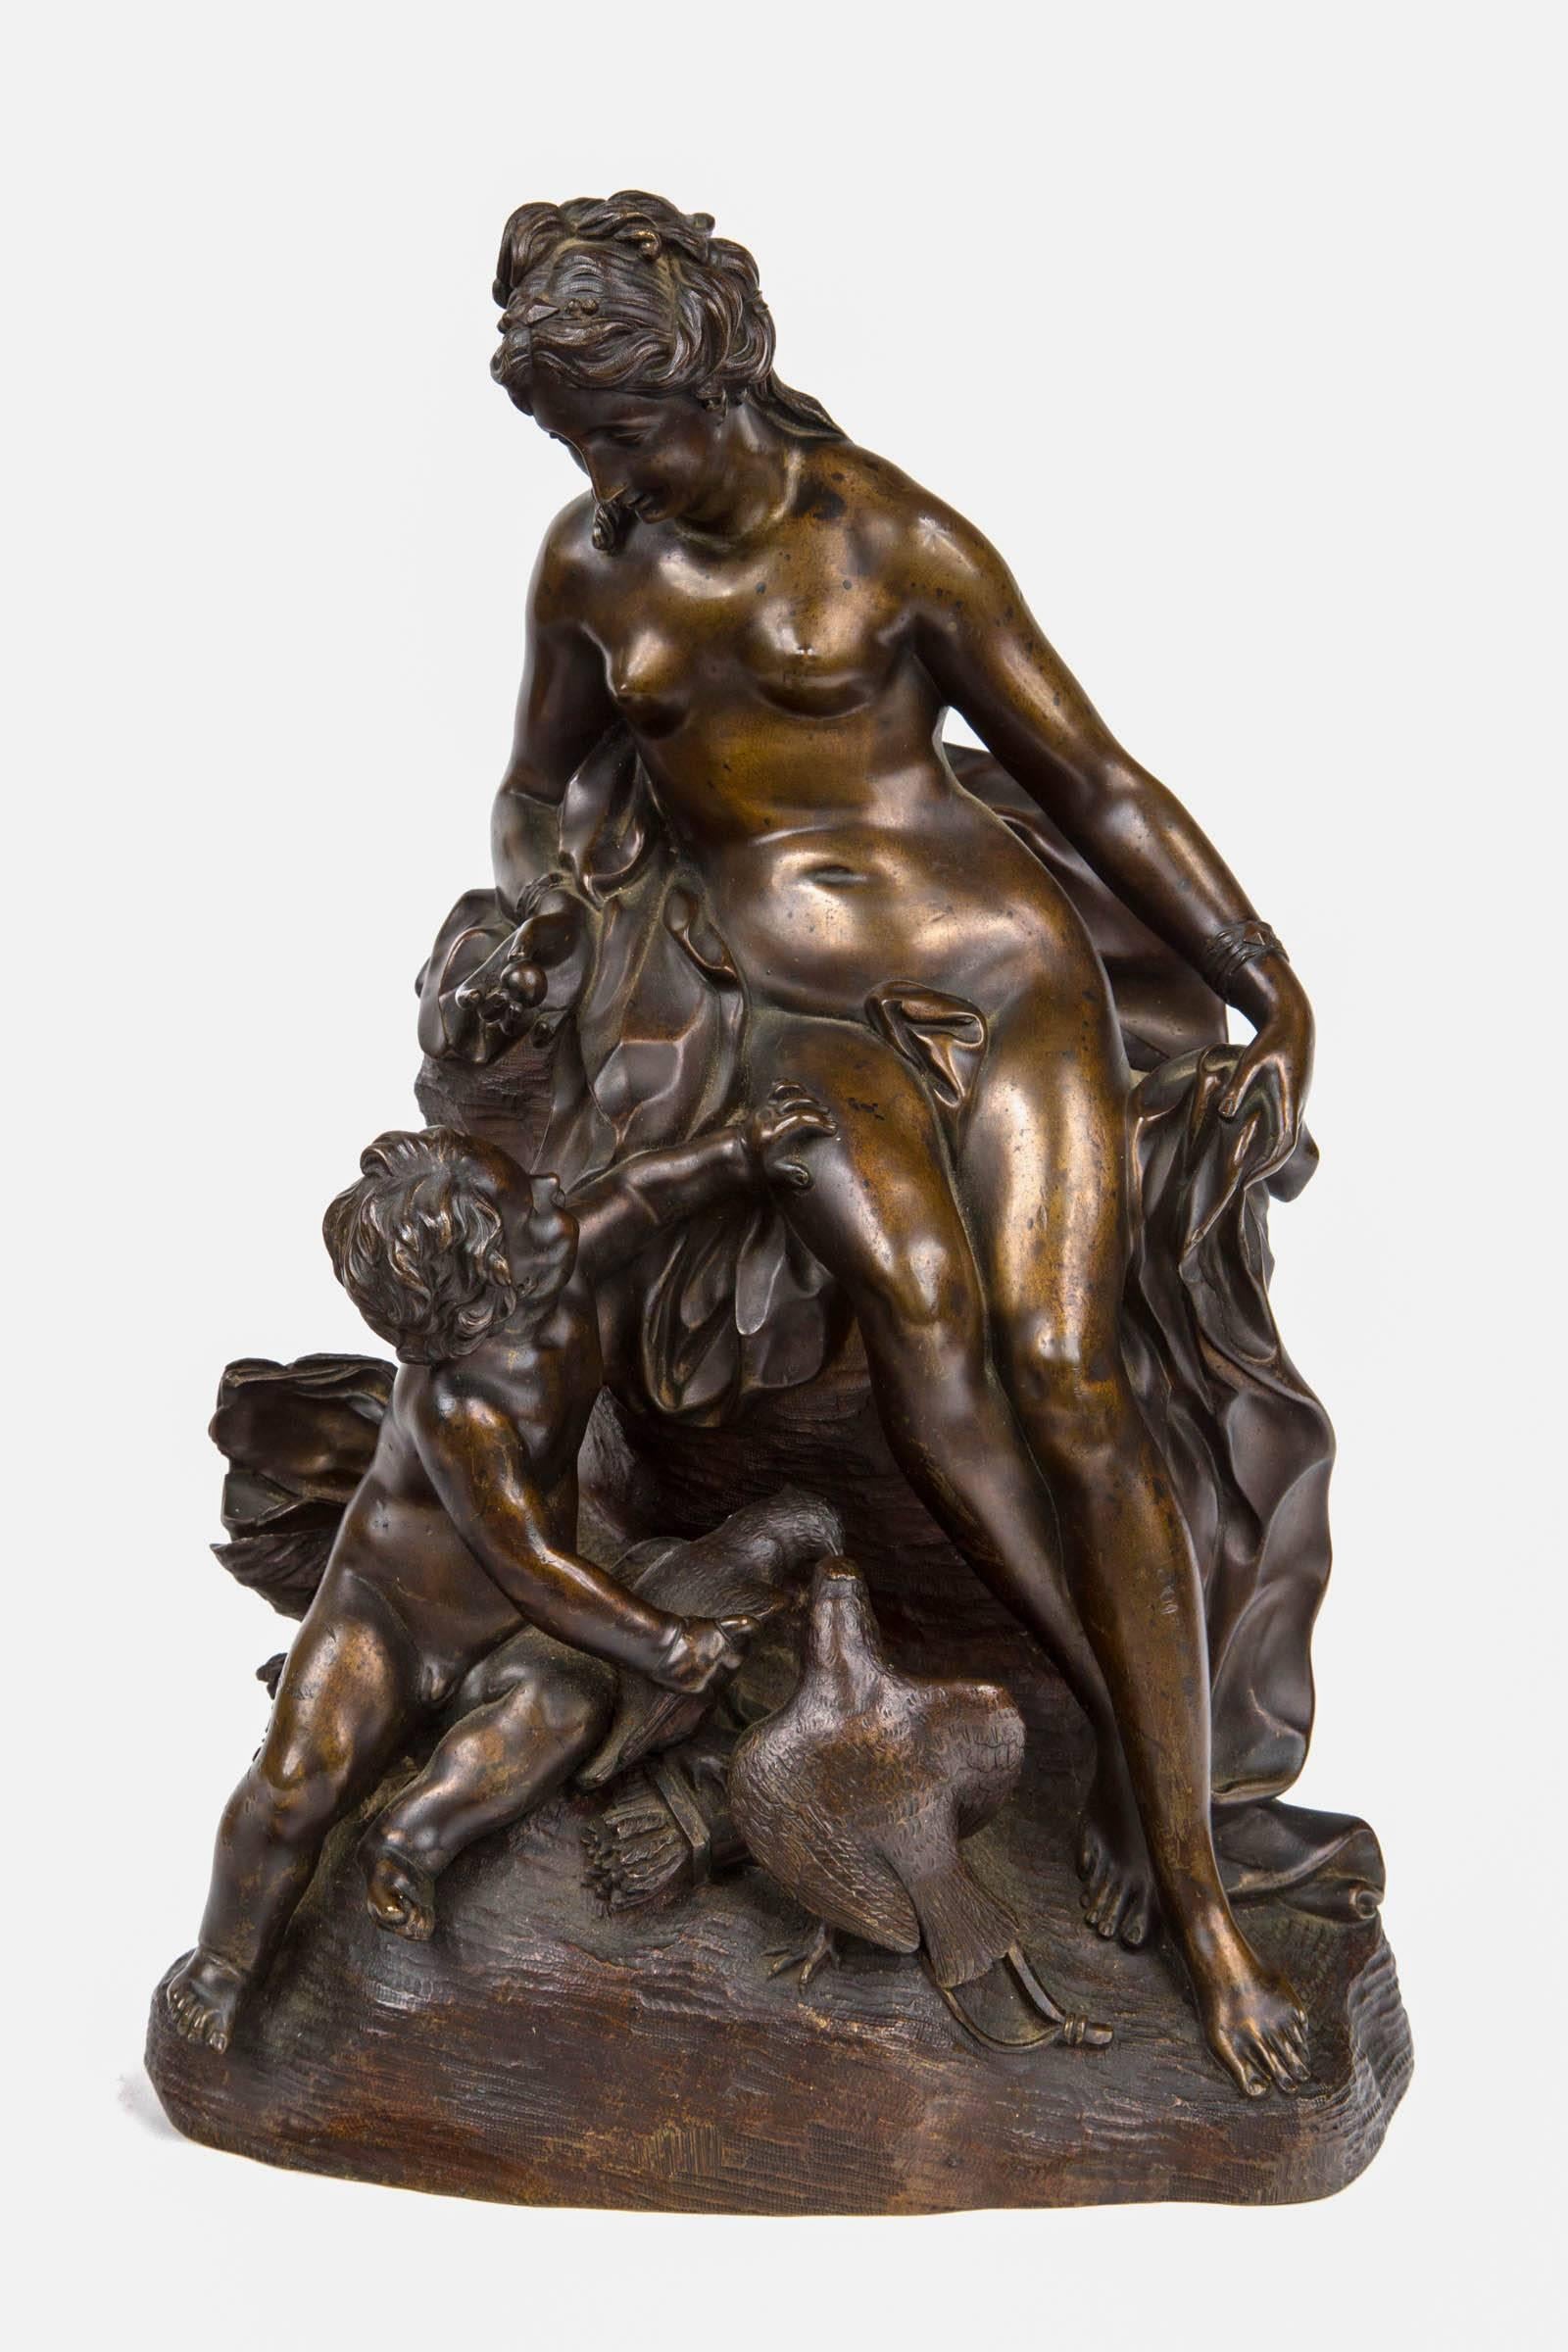 A bronze group of Venus educating cupid
Circle of Corneille van Cleve (1646-1732), French, first half of the 18th century
Depicting Venus seated on a rock looking over the infant Cupid who reaches up to his mother with one hand and takes hold of